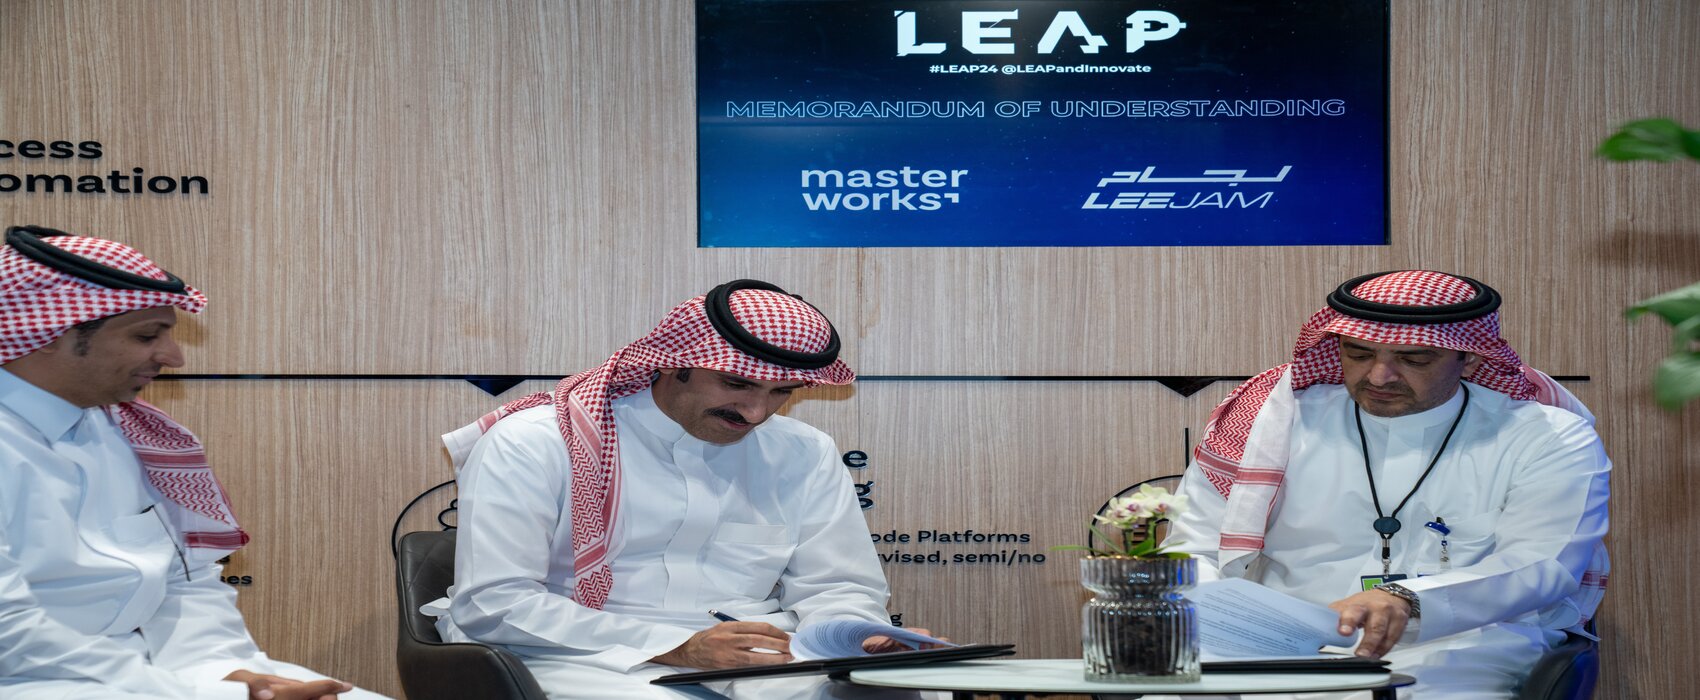 Signature of a Contract for the Utilization of AI Technologies to Enhance Digital Services and Improve Customer Experience at Leejam Sports company with Master Works